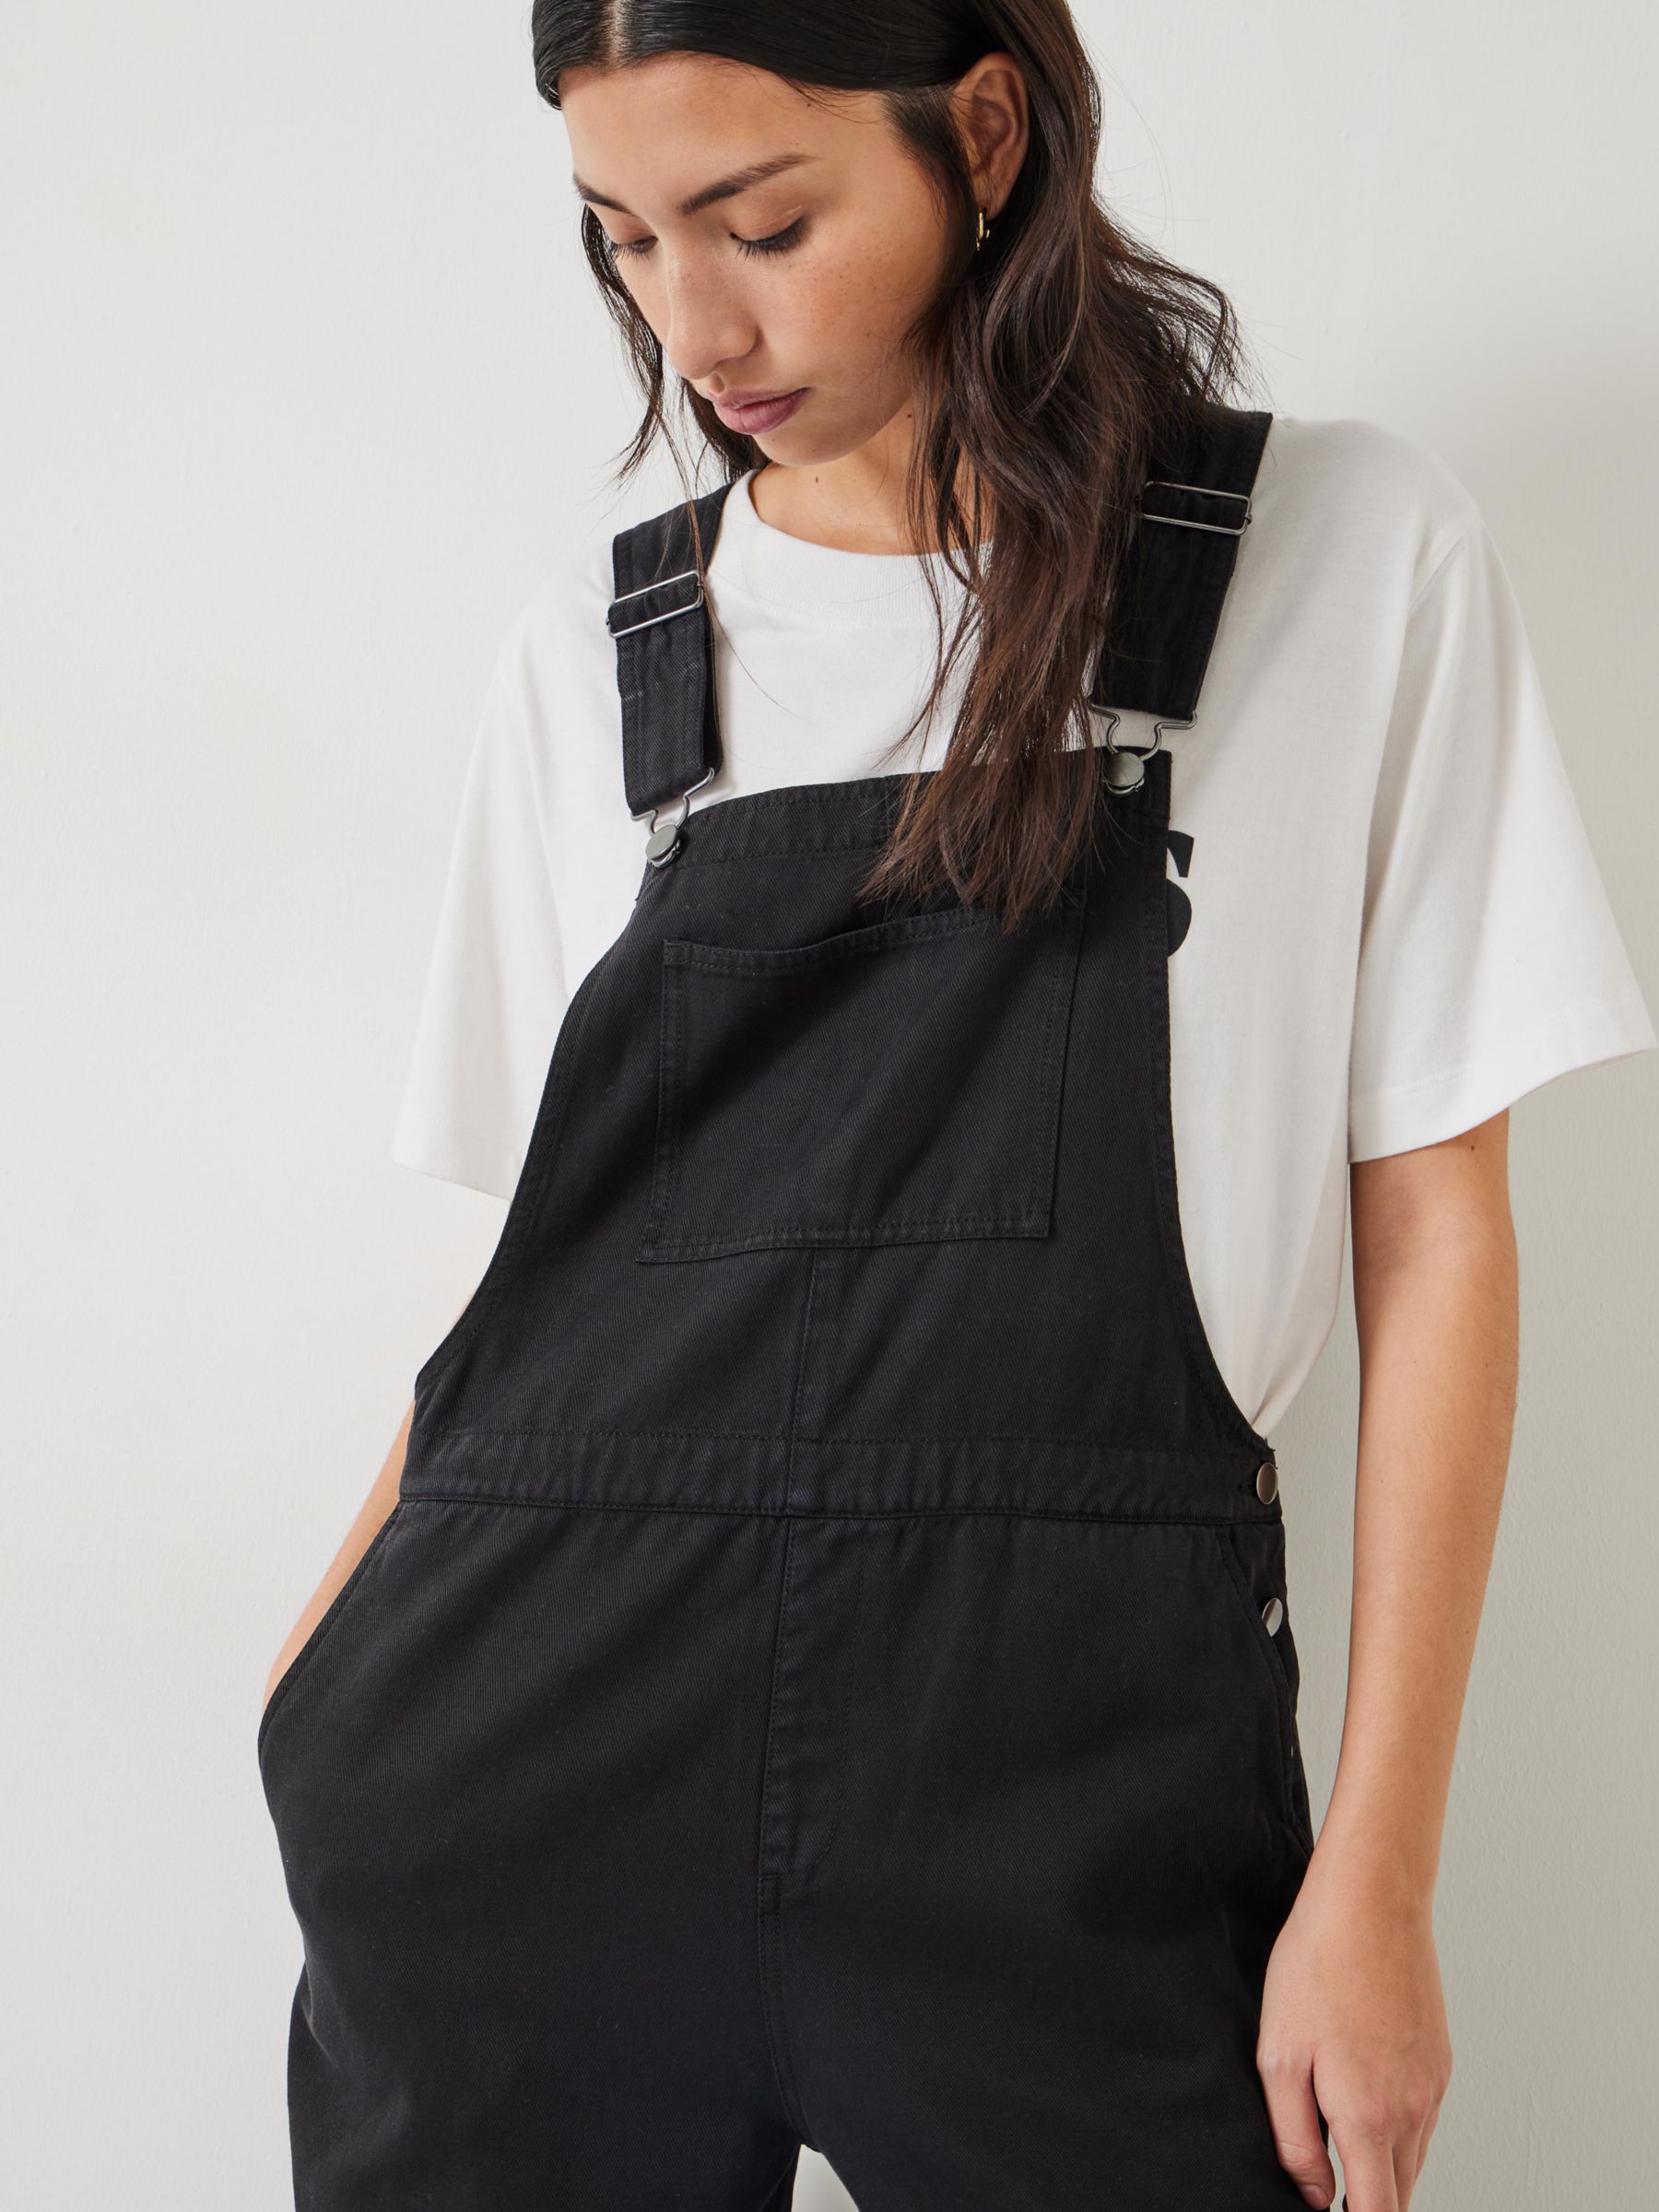 HUSH Wilma Cotton Blend Dungarees, Washed Black, 10